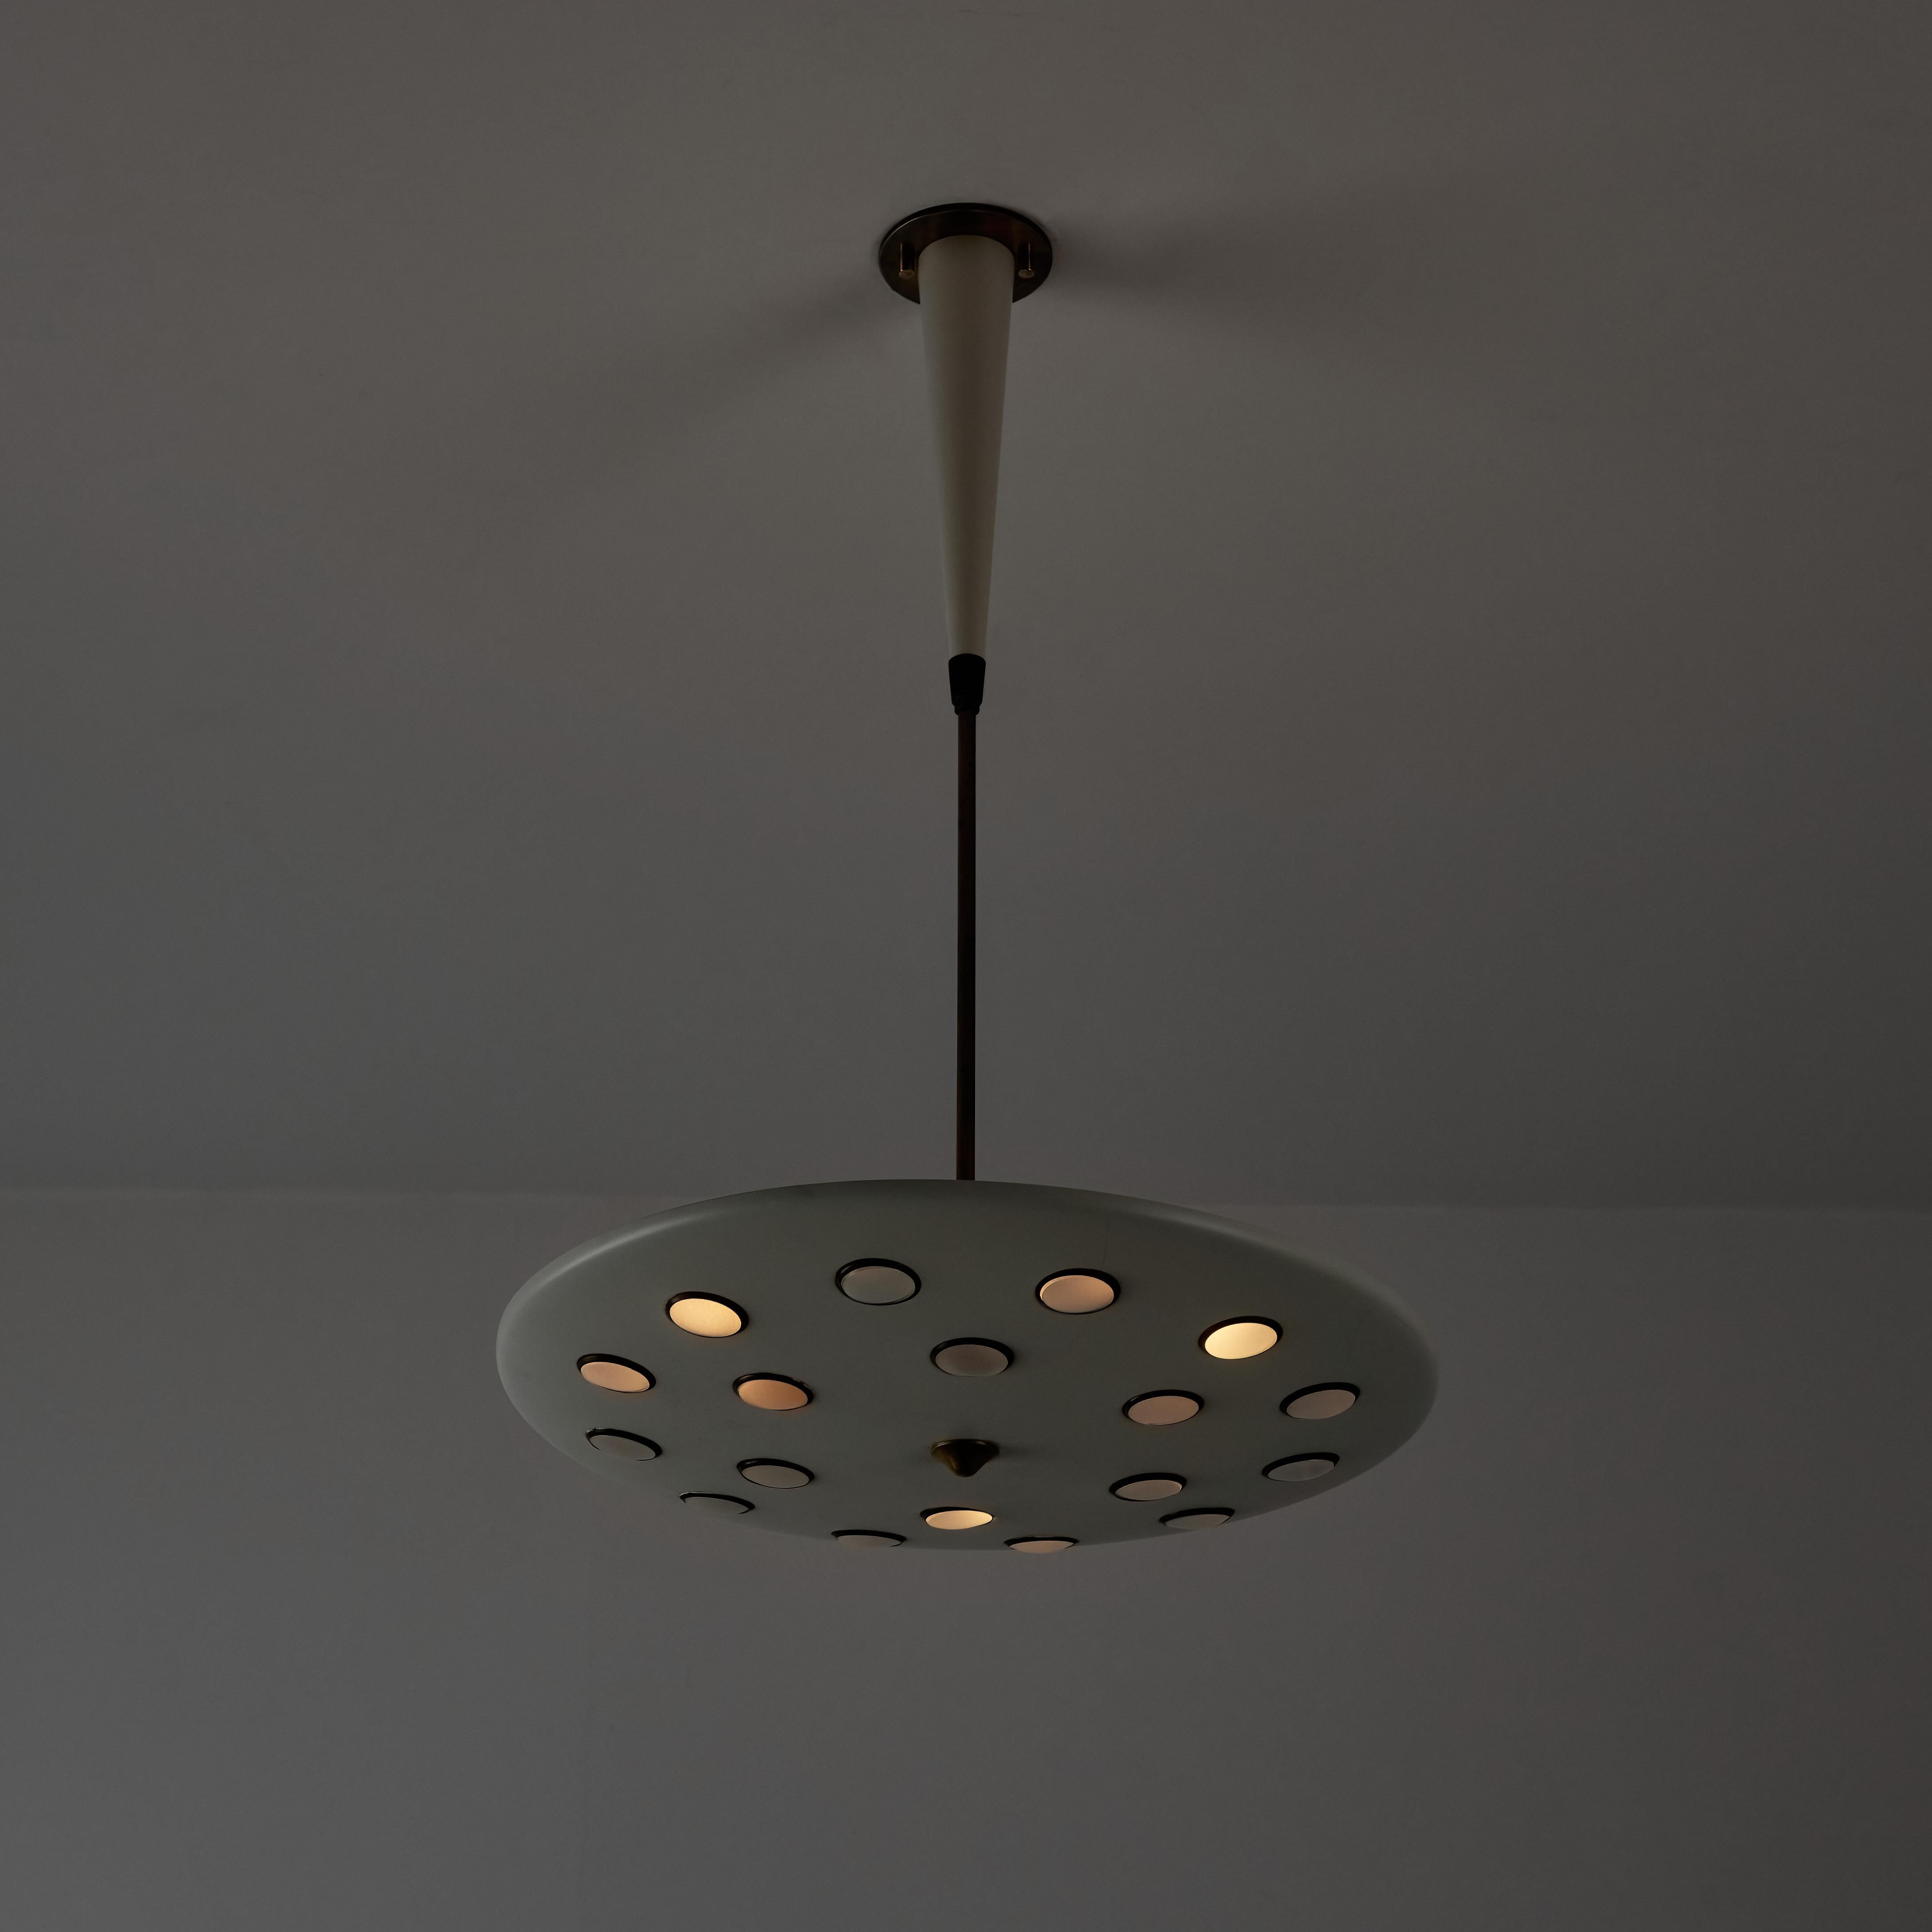 Ceiling light by Lumen. Designed and manufactured in Italy circa the 1950s. A beautifully refined featuring poked holes in the enameled dish. Each hole is rimmed by a brass ring, then nestled in the hole is a clear lens. The light holds a tri-socket